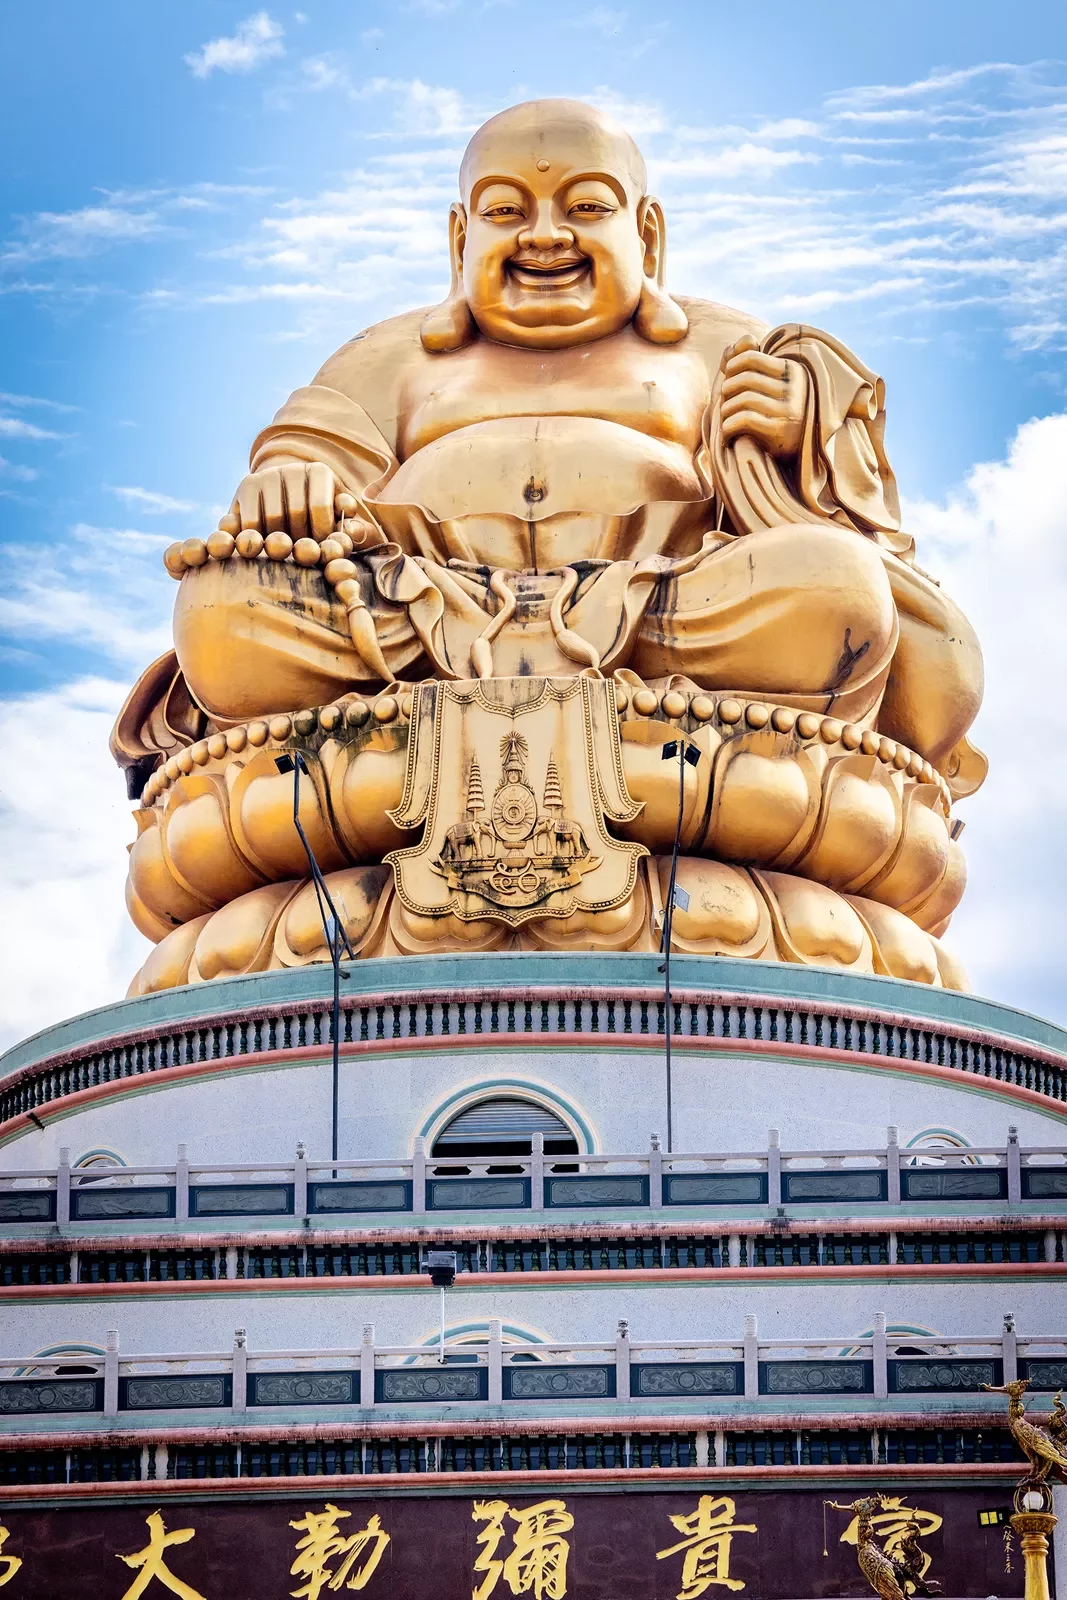 Large gold Buddha statue on top of building